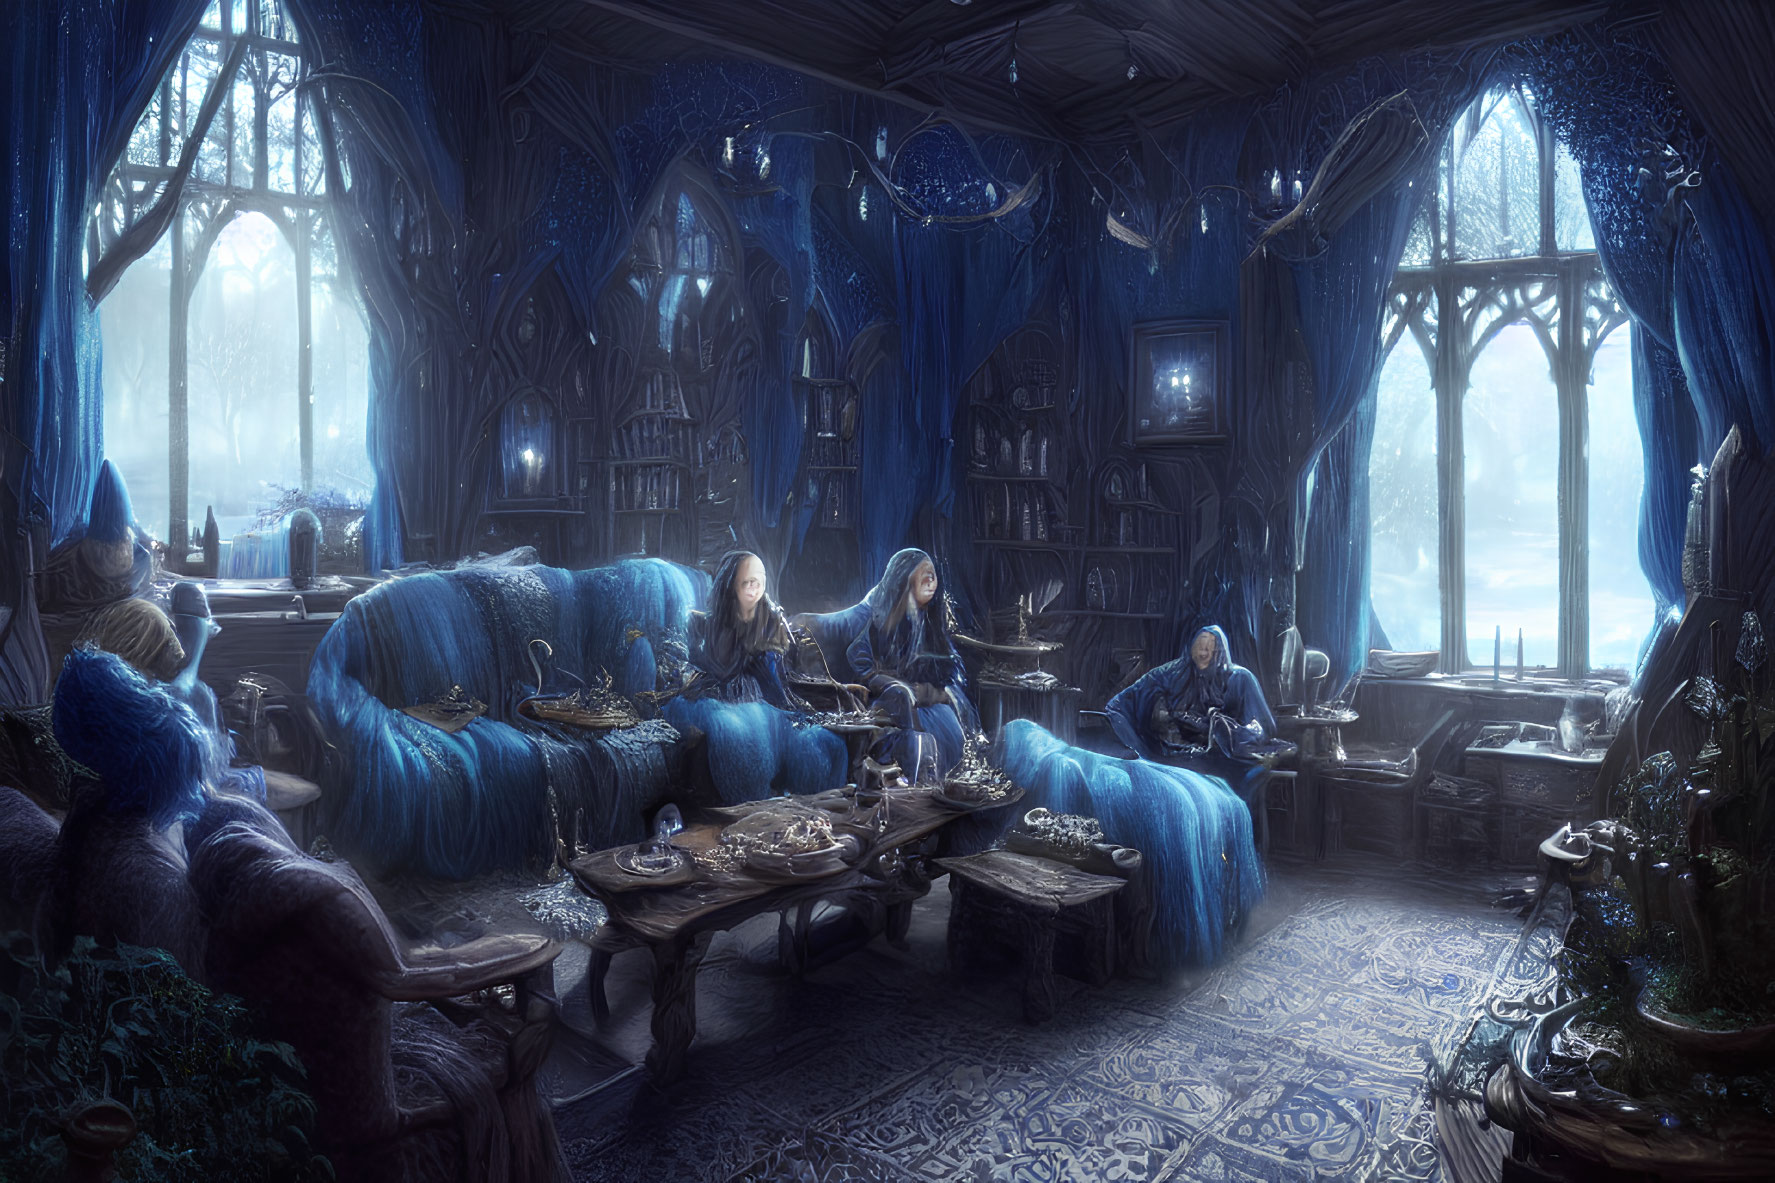 Elegant elves in blue-toned room with mystical forest view